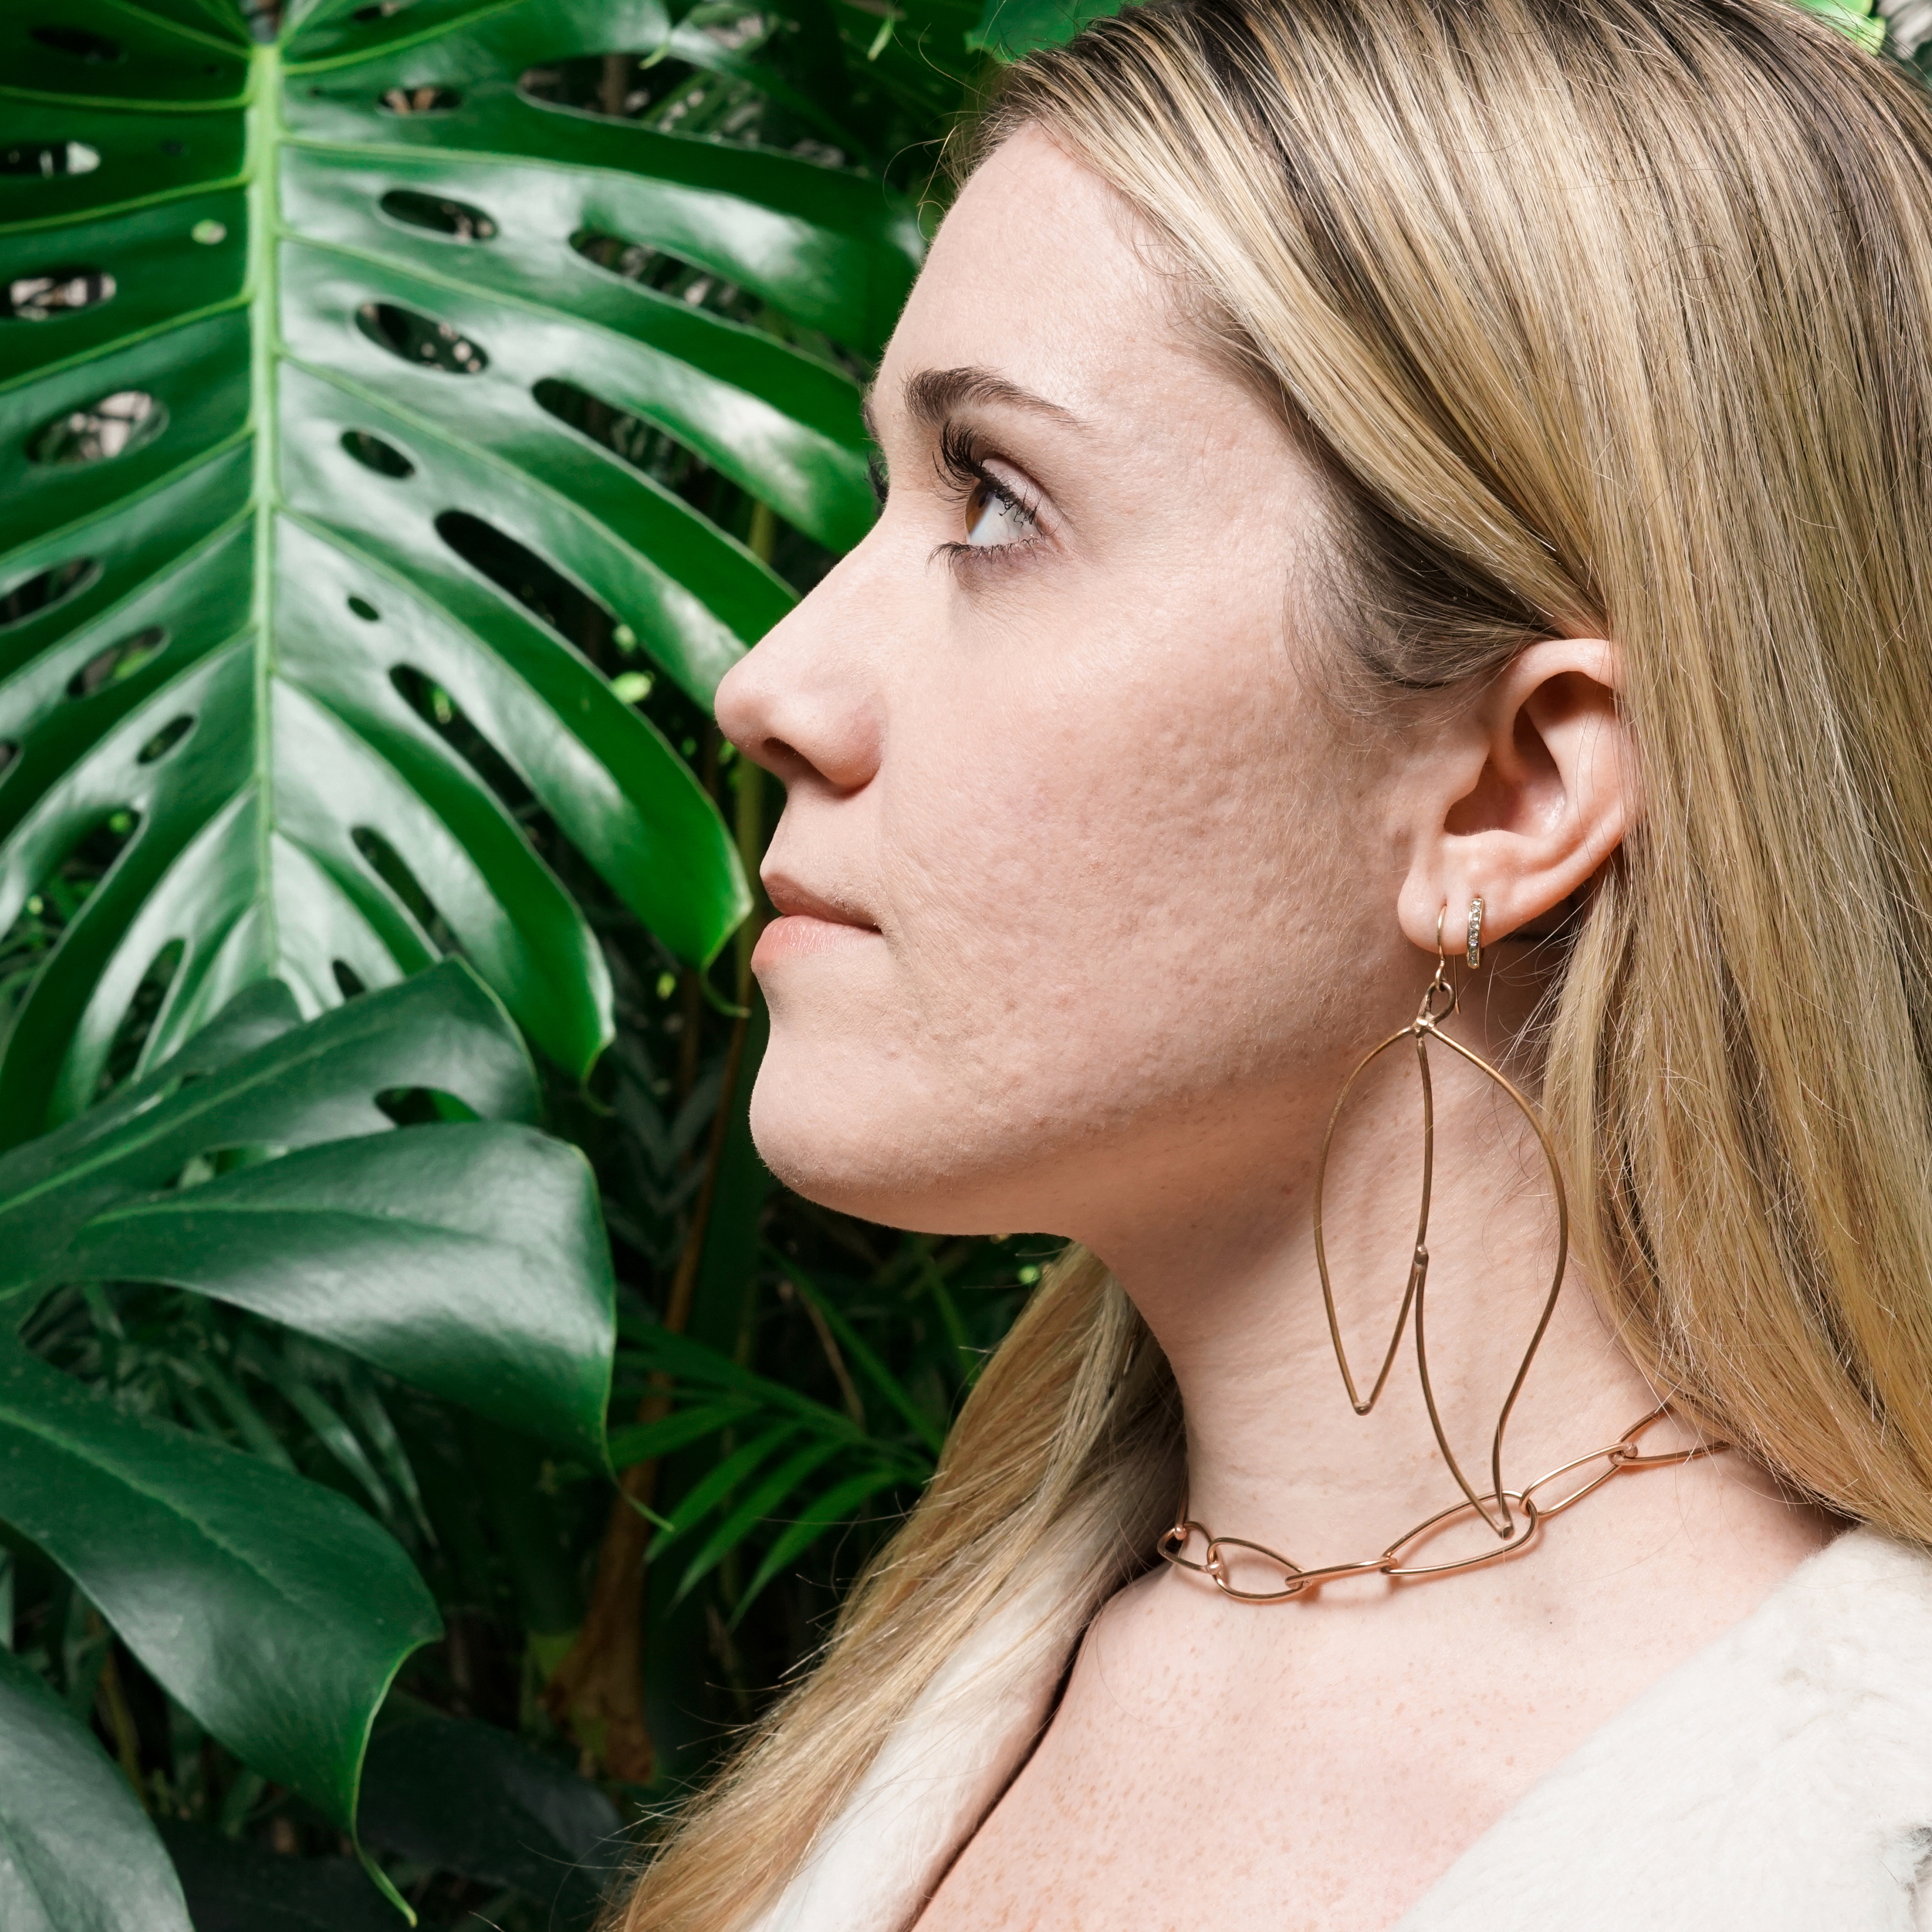 Trista with monstera leaves and bronze statement jewelry